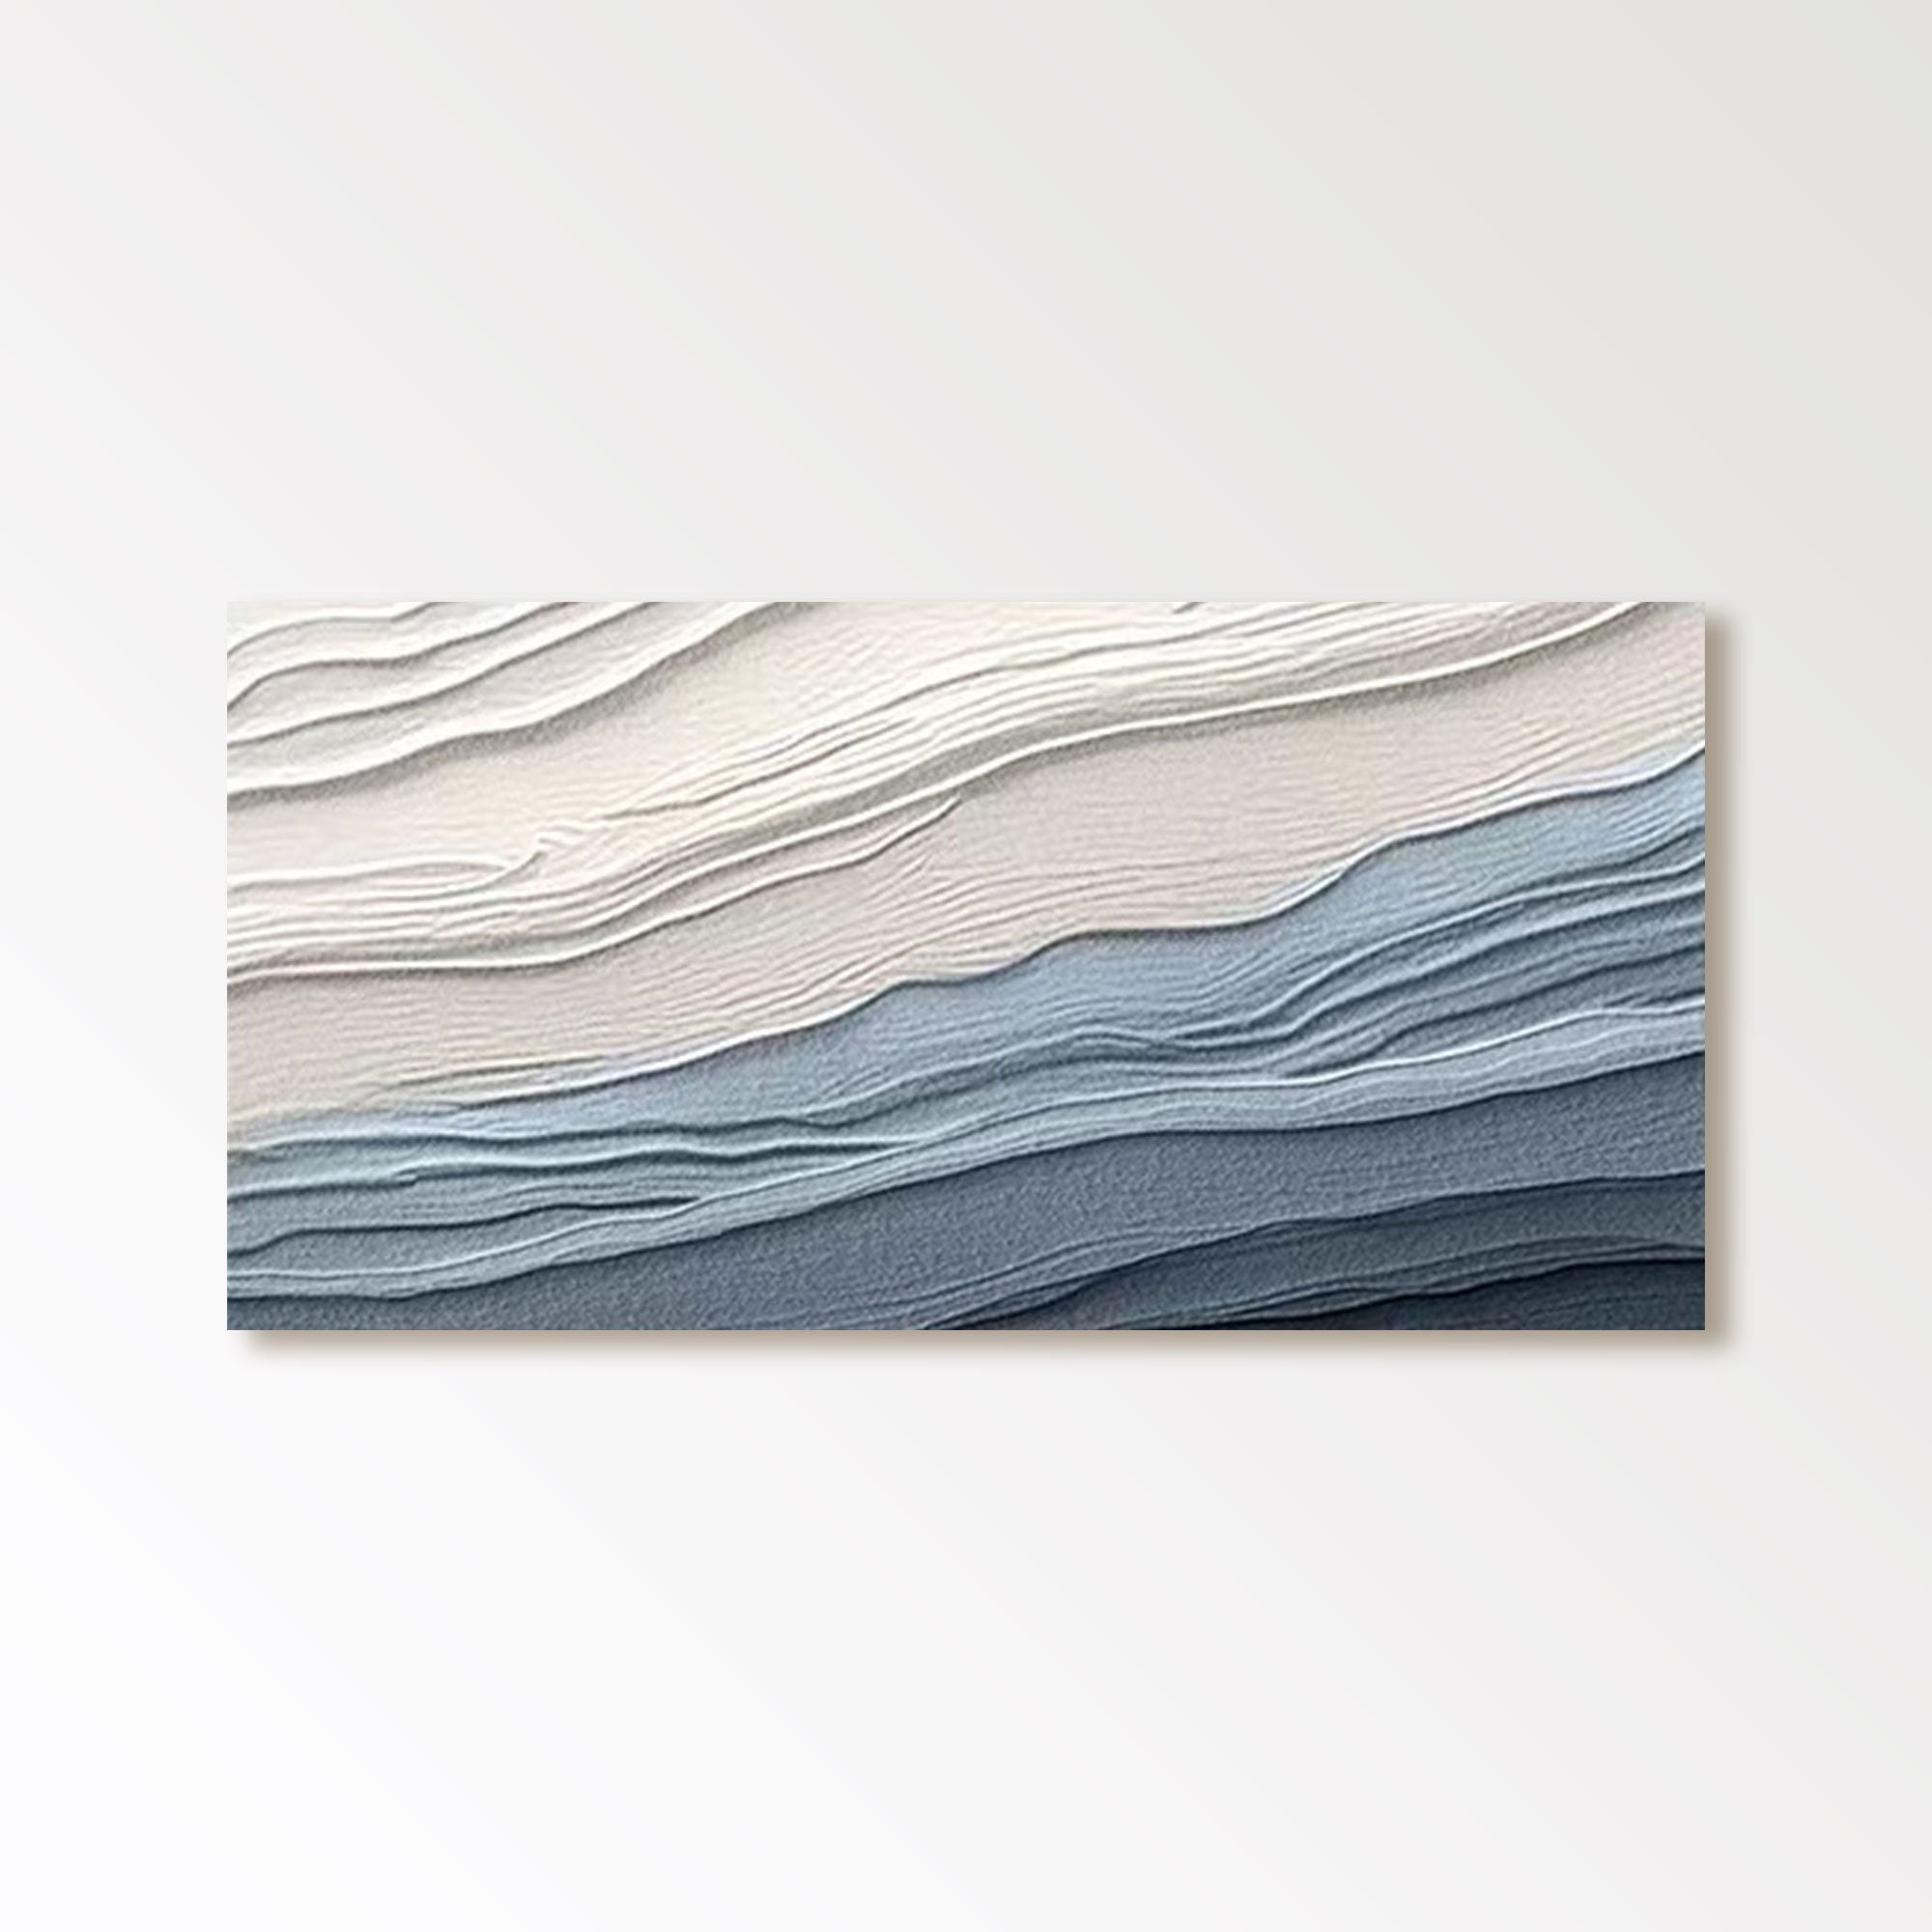 Plaster Painting "Serenity Waves"